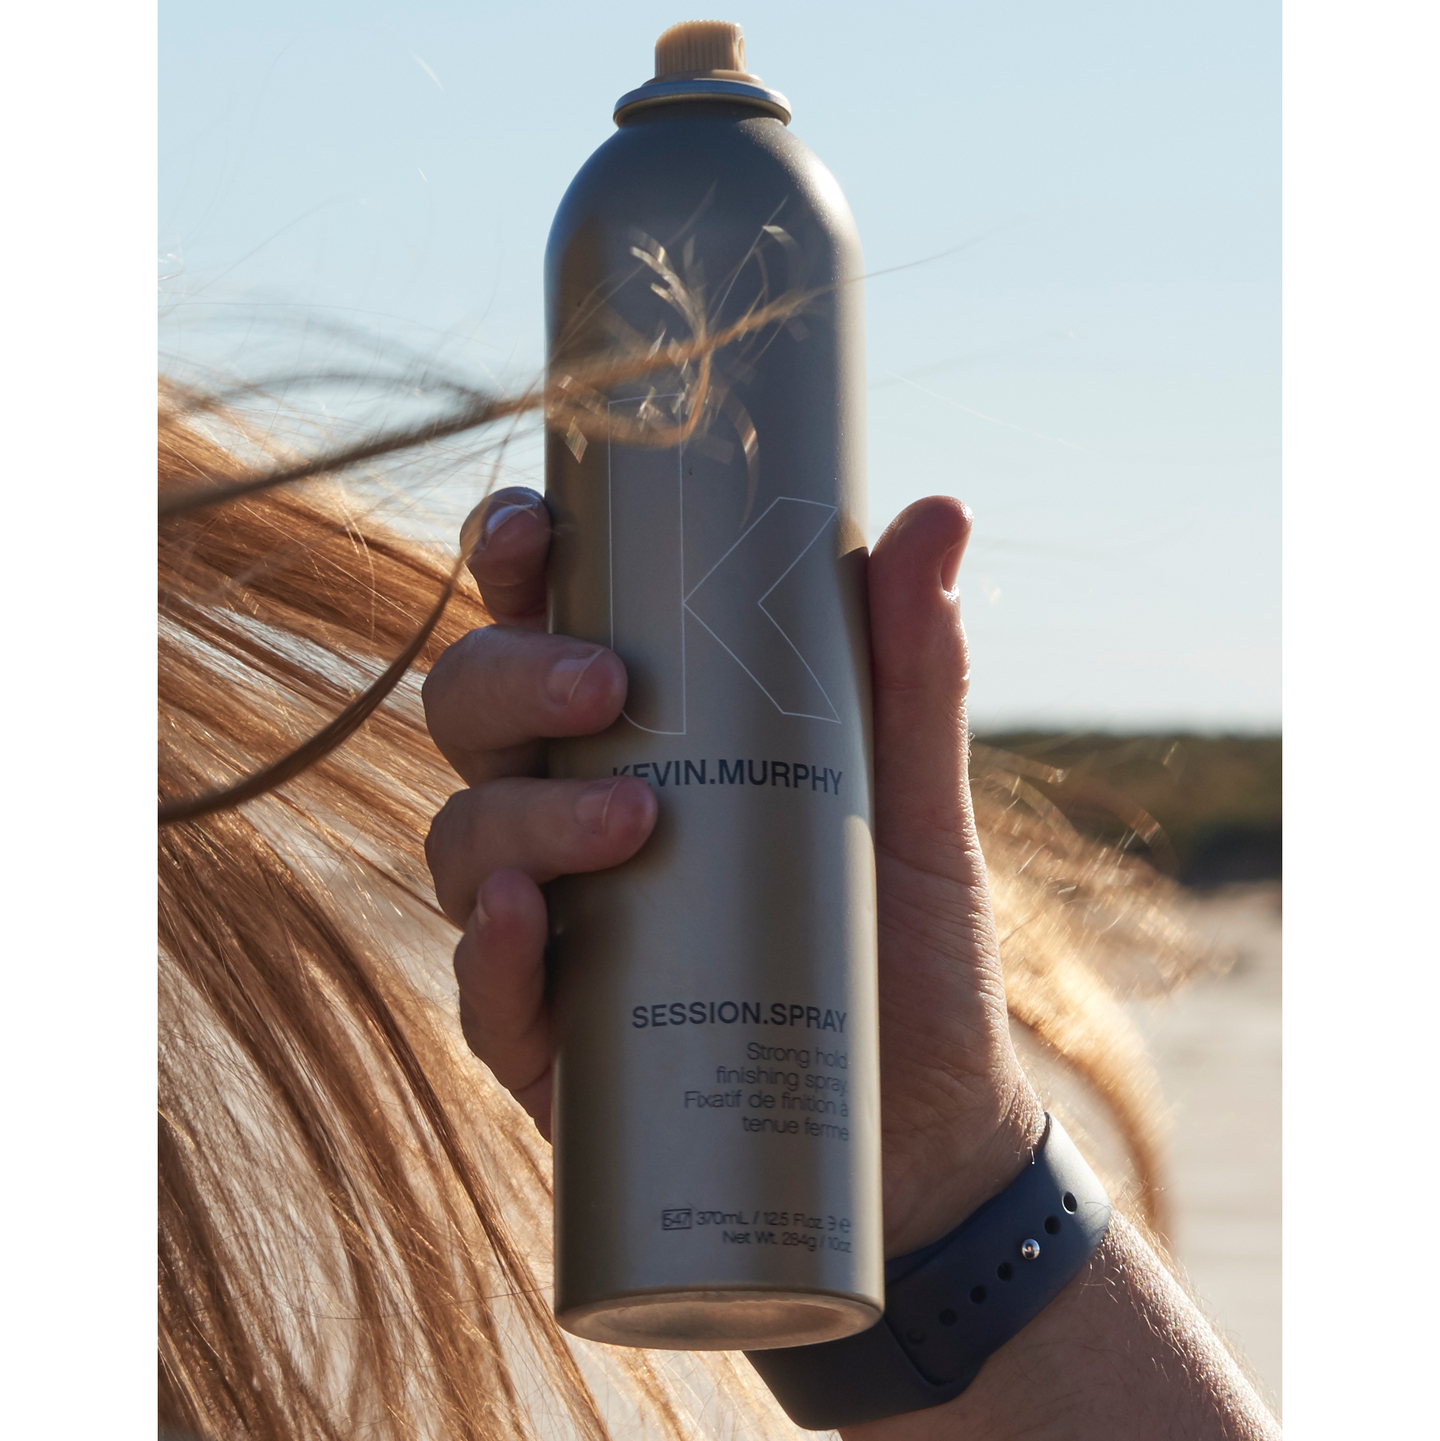 Hand holding a KEVIN.MURPHY SESSION.SPRAY against a windy beach backdrop.